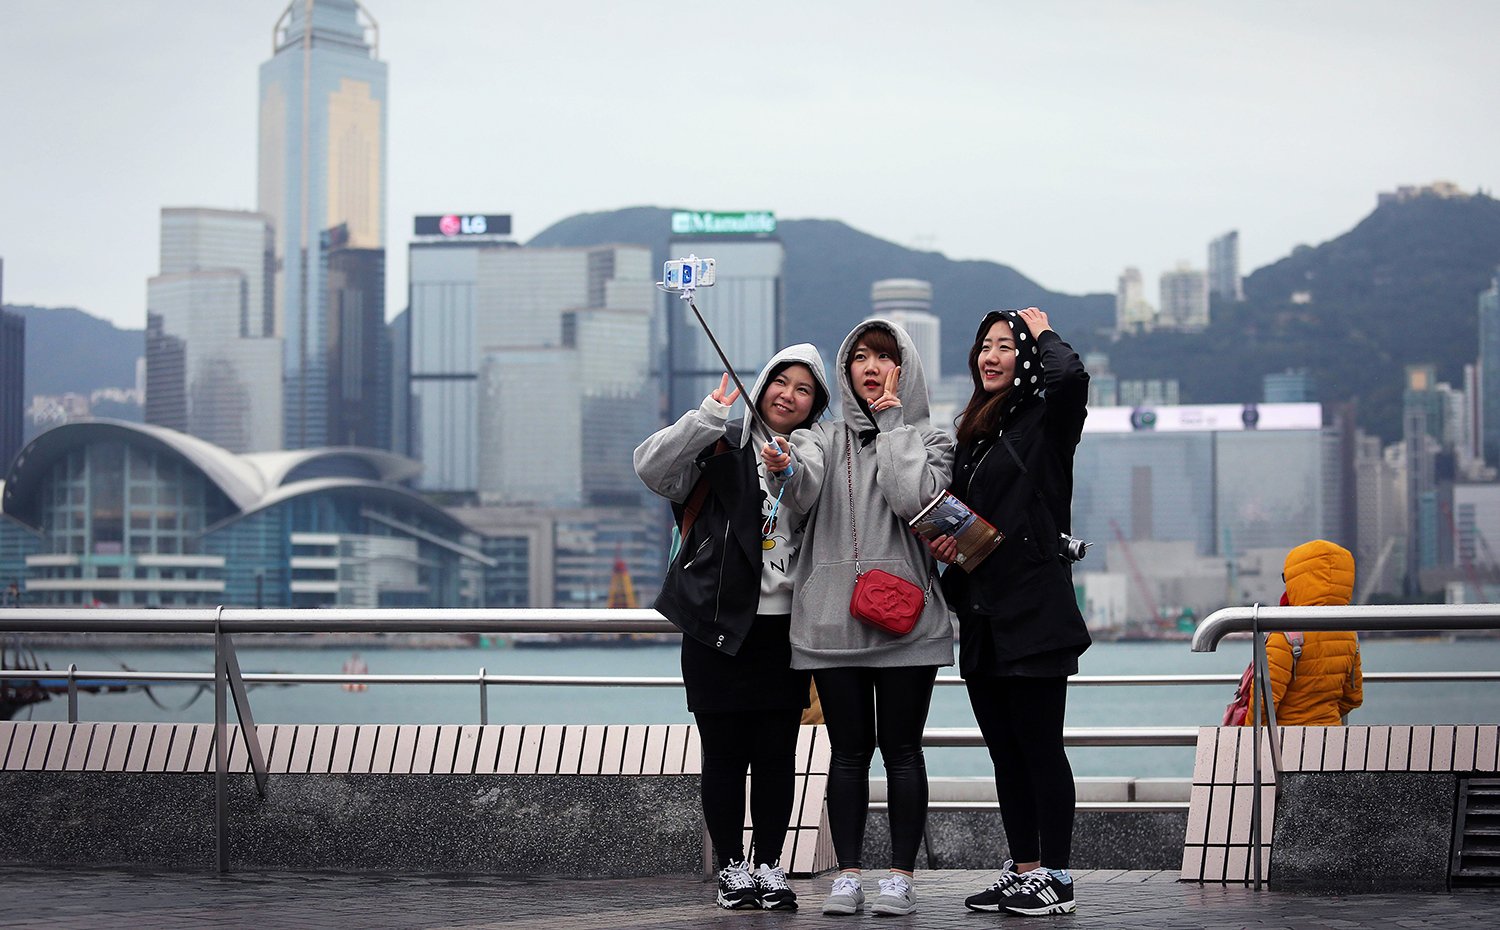 Three girls take a selfie as they brave the cold on a viewing deck next to Victoria Harbour in the Tsim Sha Tsui district of Hong Kong on January 24, 2016. A cold snap gripped Hong Kong on January 24, with residents shivering as temperatures plunged to the lowest point in nearly 60 years and frost dusted the mountaintops of a city accustomed to a subtropical climate. AFP PHOTO / ISAAC LAWRENCE